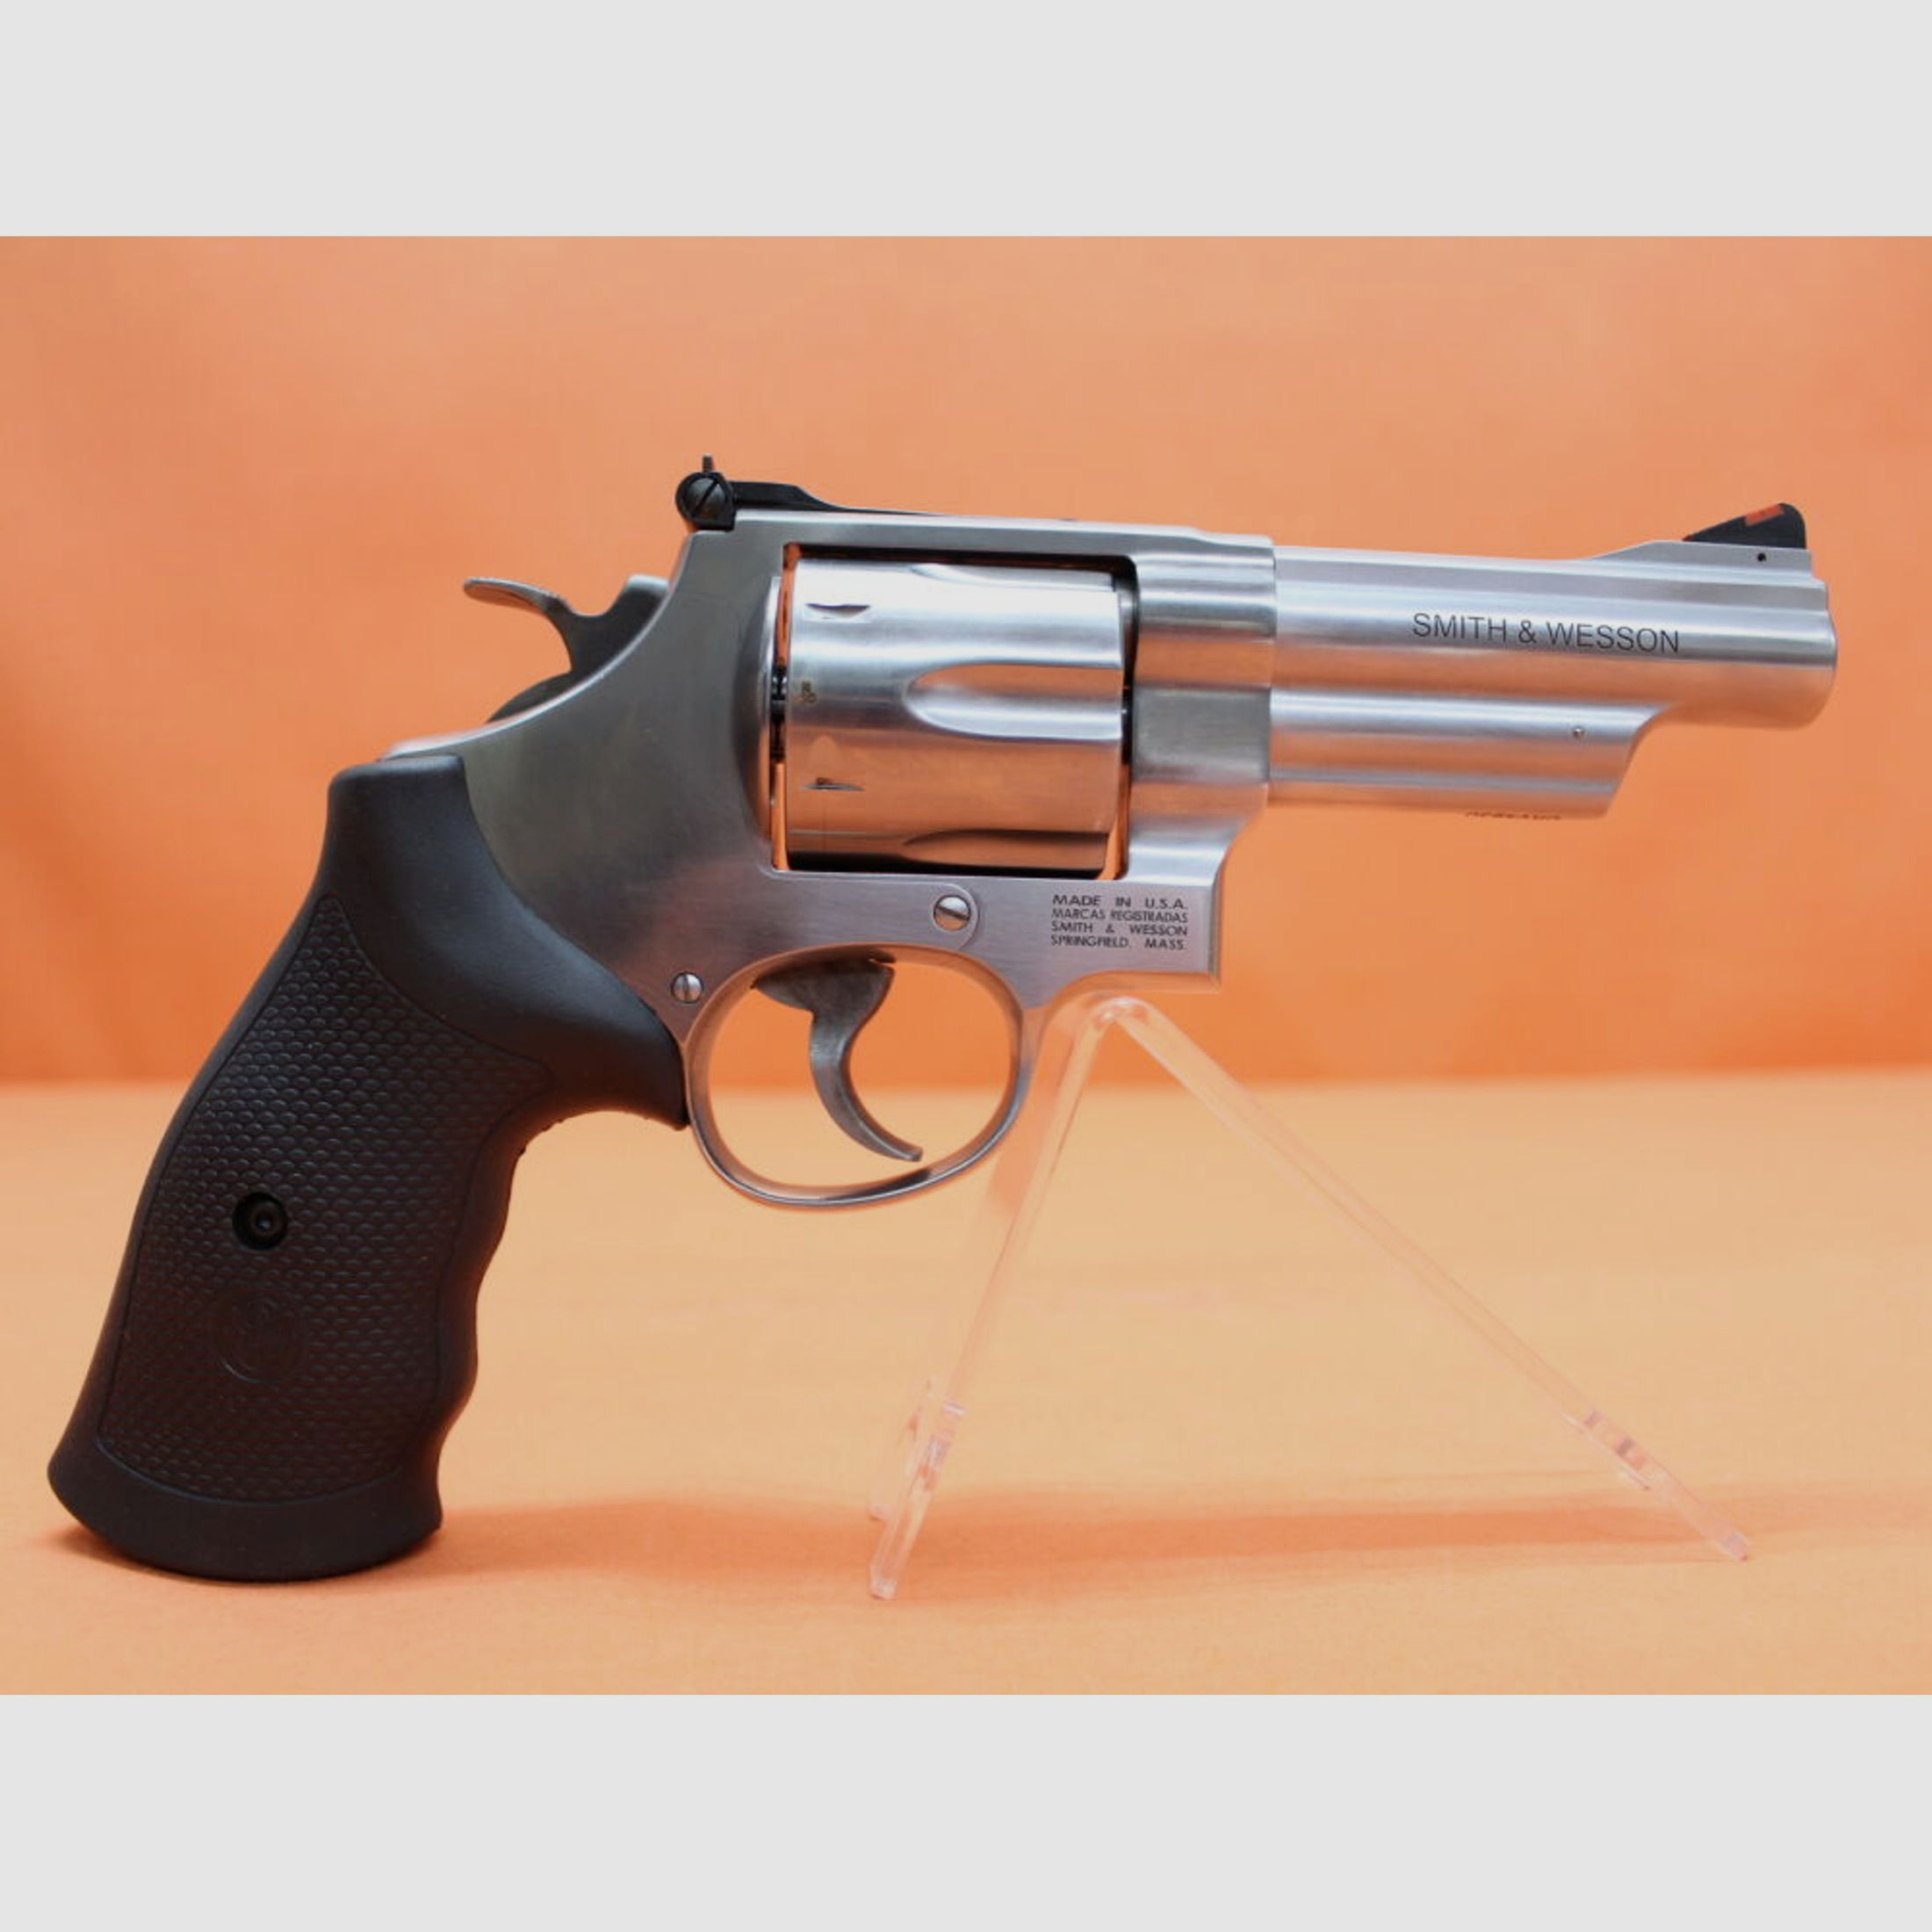 Smith & Wesson/S&W	 Revolver .44RemMagnum Smith&Wesson/ S&W629-6 Stainless, 4" Lauf/ Mikrometervisier/ Gummigriff